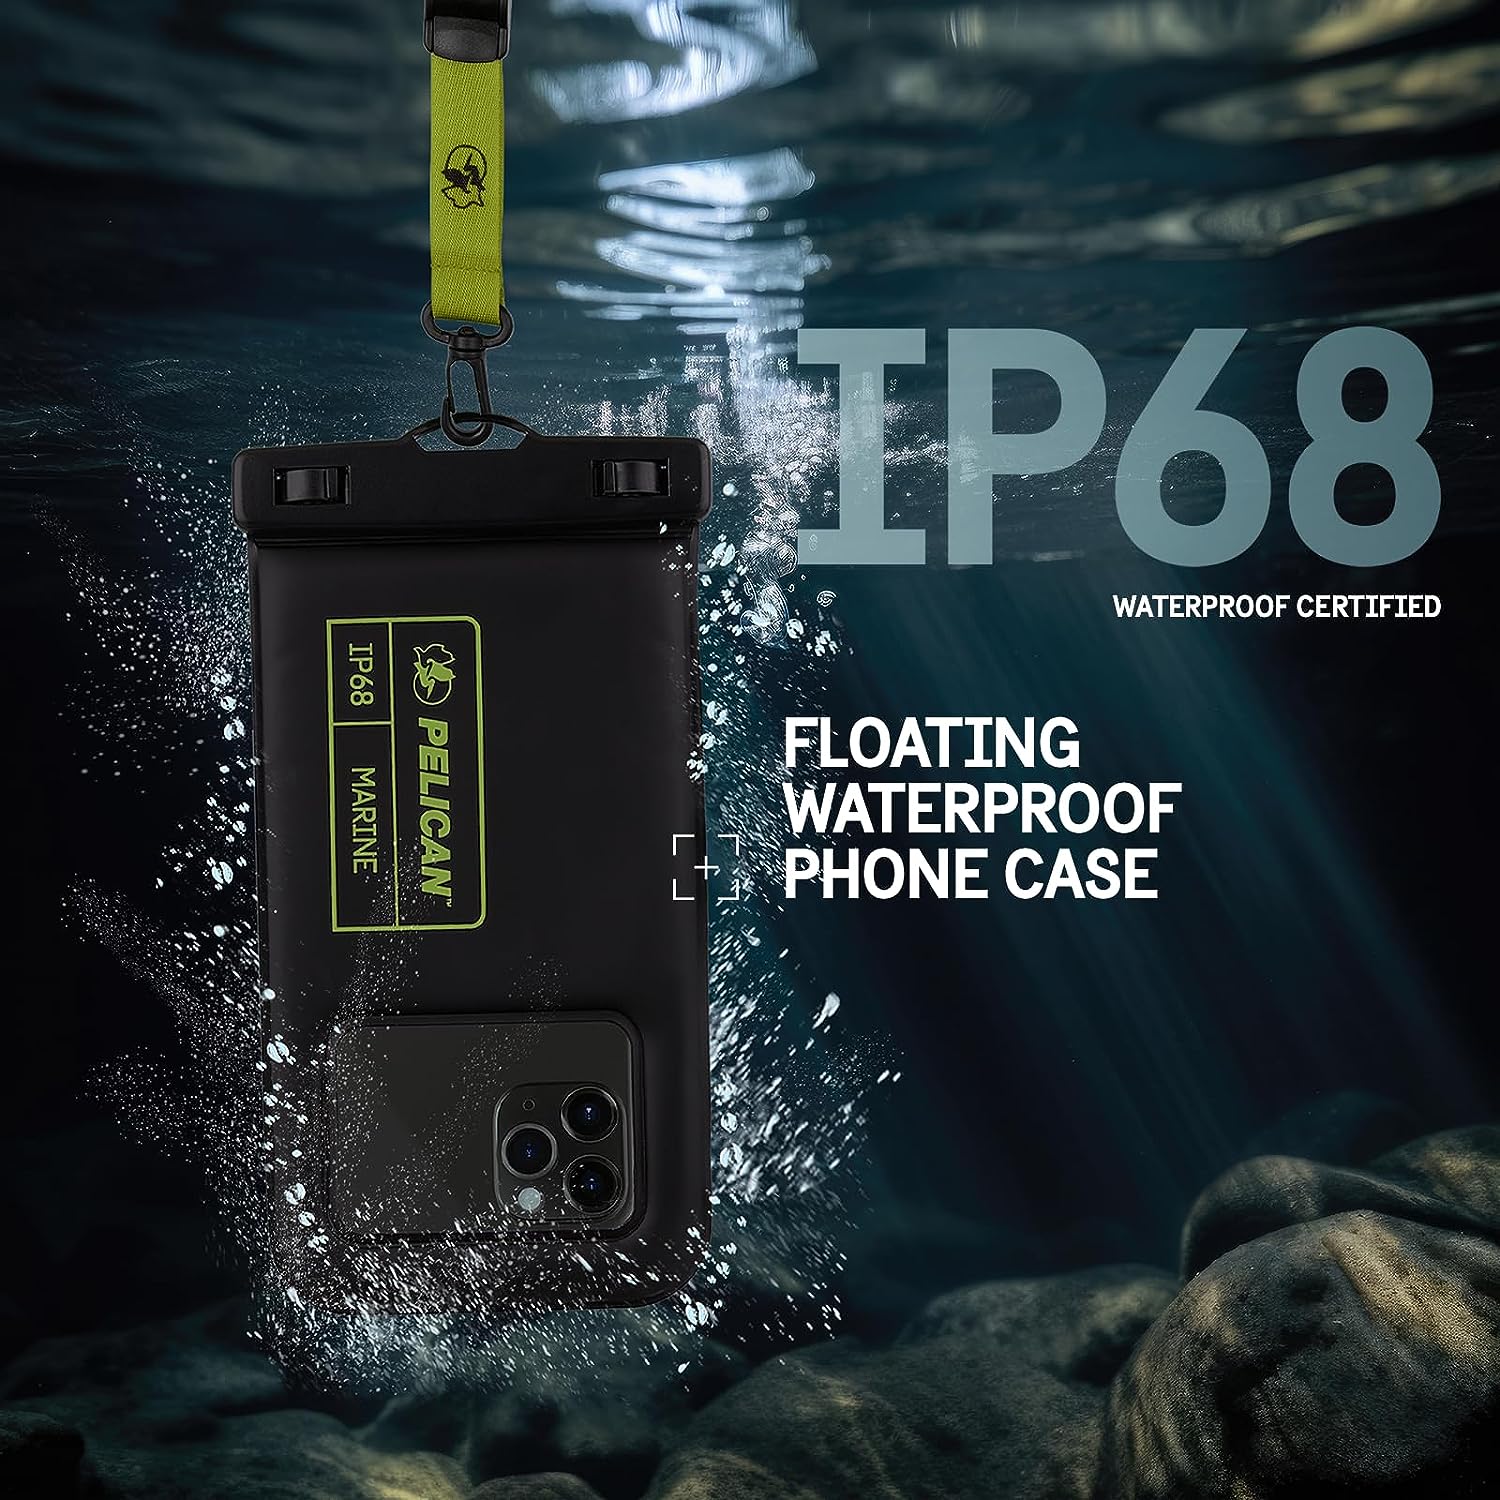 Pelican Marine Waterproof Floating Pouch Case for Phones & Valuables IP68 Rated